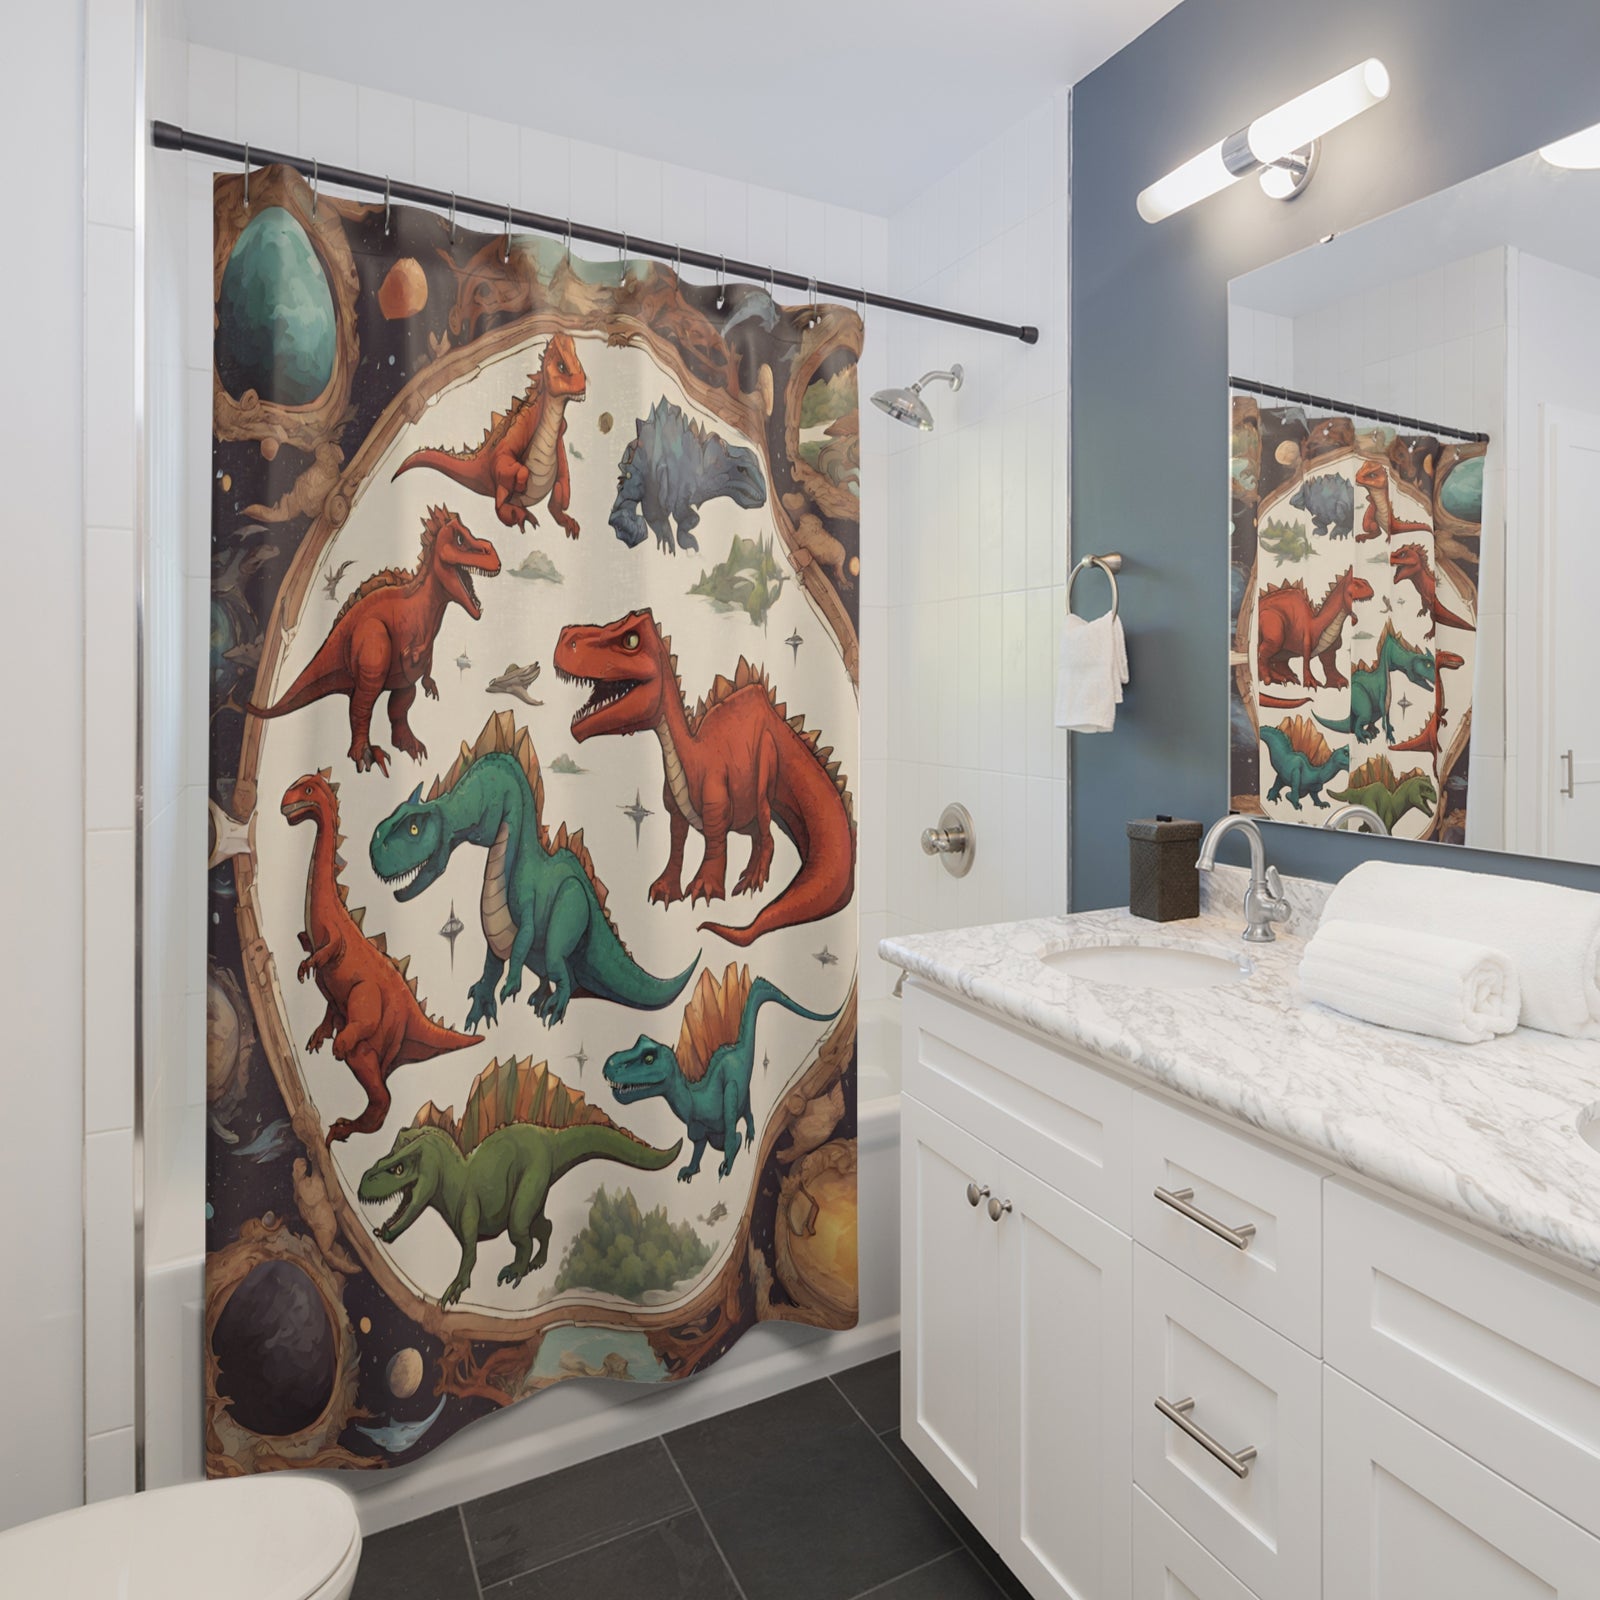 Dinosaur-Inspired Shower Curtains: Trendy and Cool Designs for Kids' Bathrooms - Transform Bath Time with Our Latest Collection!